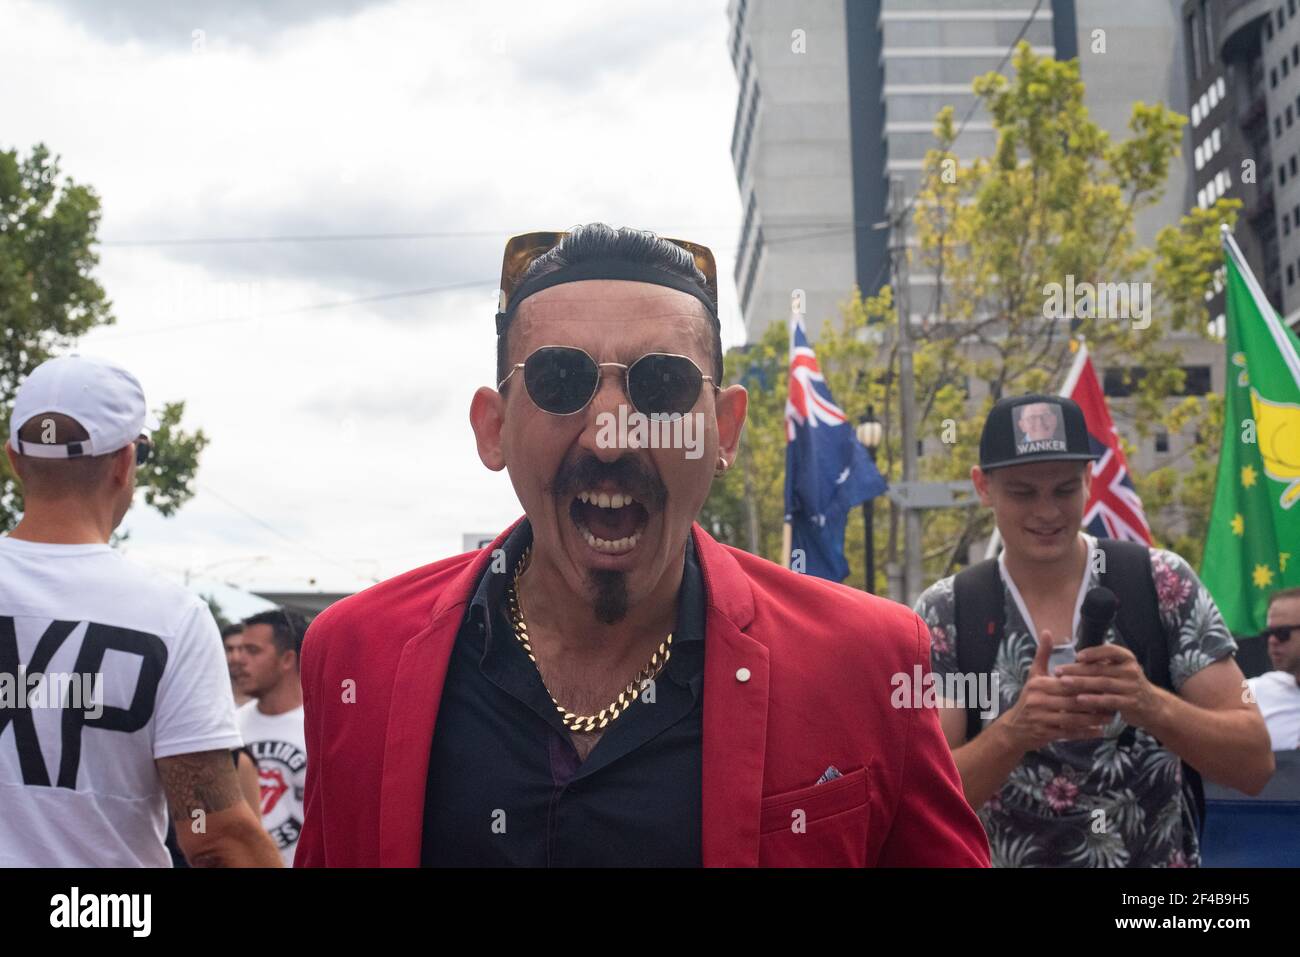 Melbourne, Australia. 20th Mar 2021. A vocal protester yells a chant at a worldwide rally for freedom against the COVID-19 vaccination. March 20, Melbourne, Australia. Credit: Jay Kogler/Alamy Live News Stock Photo